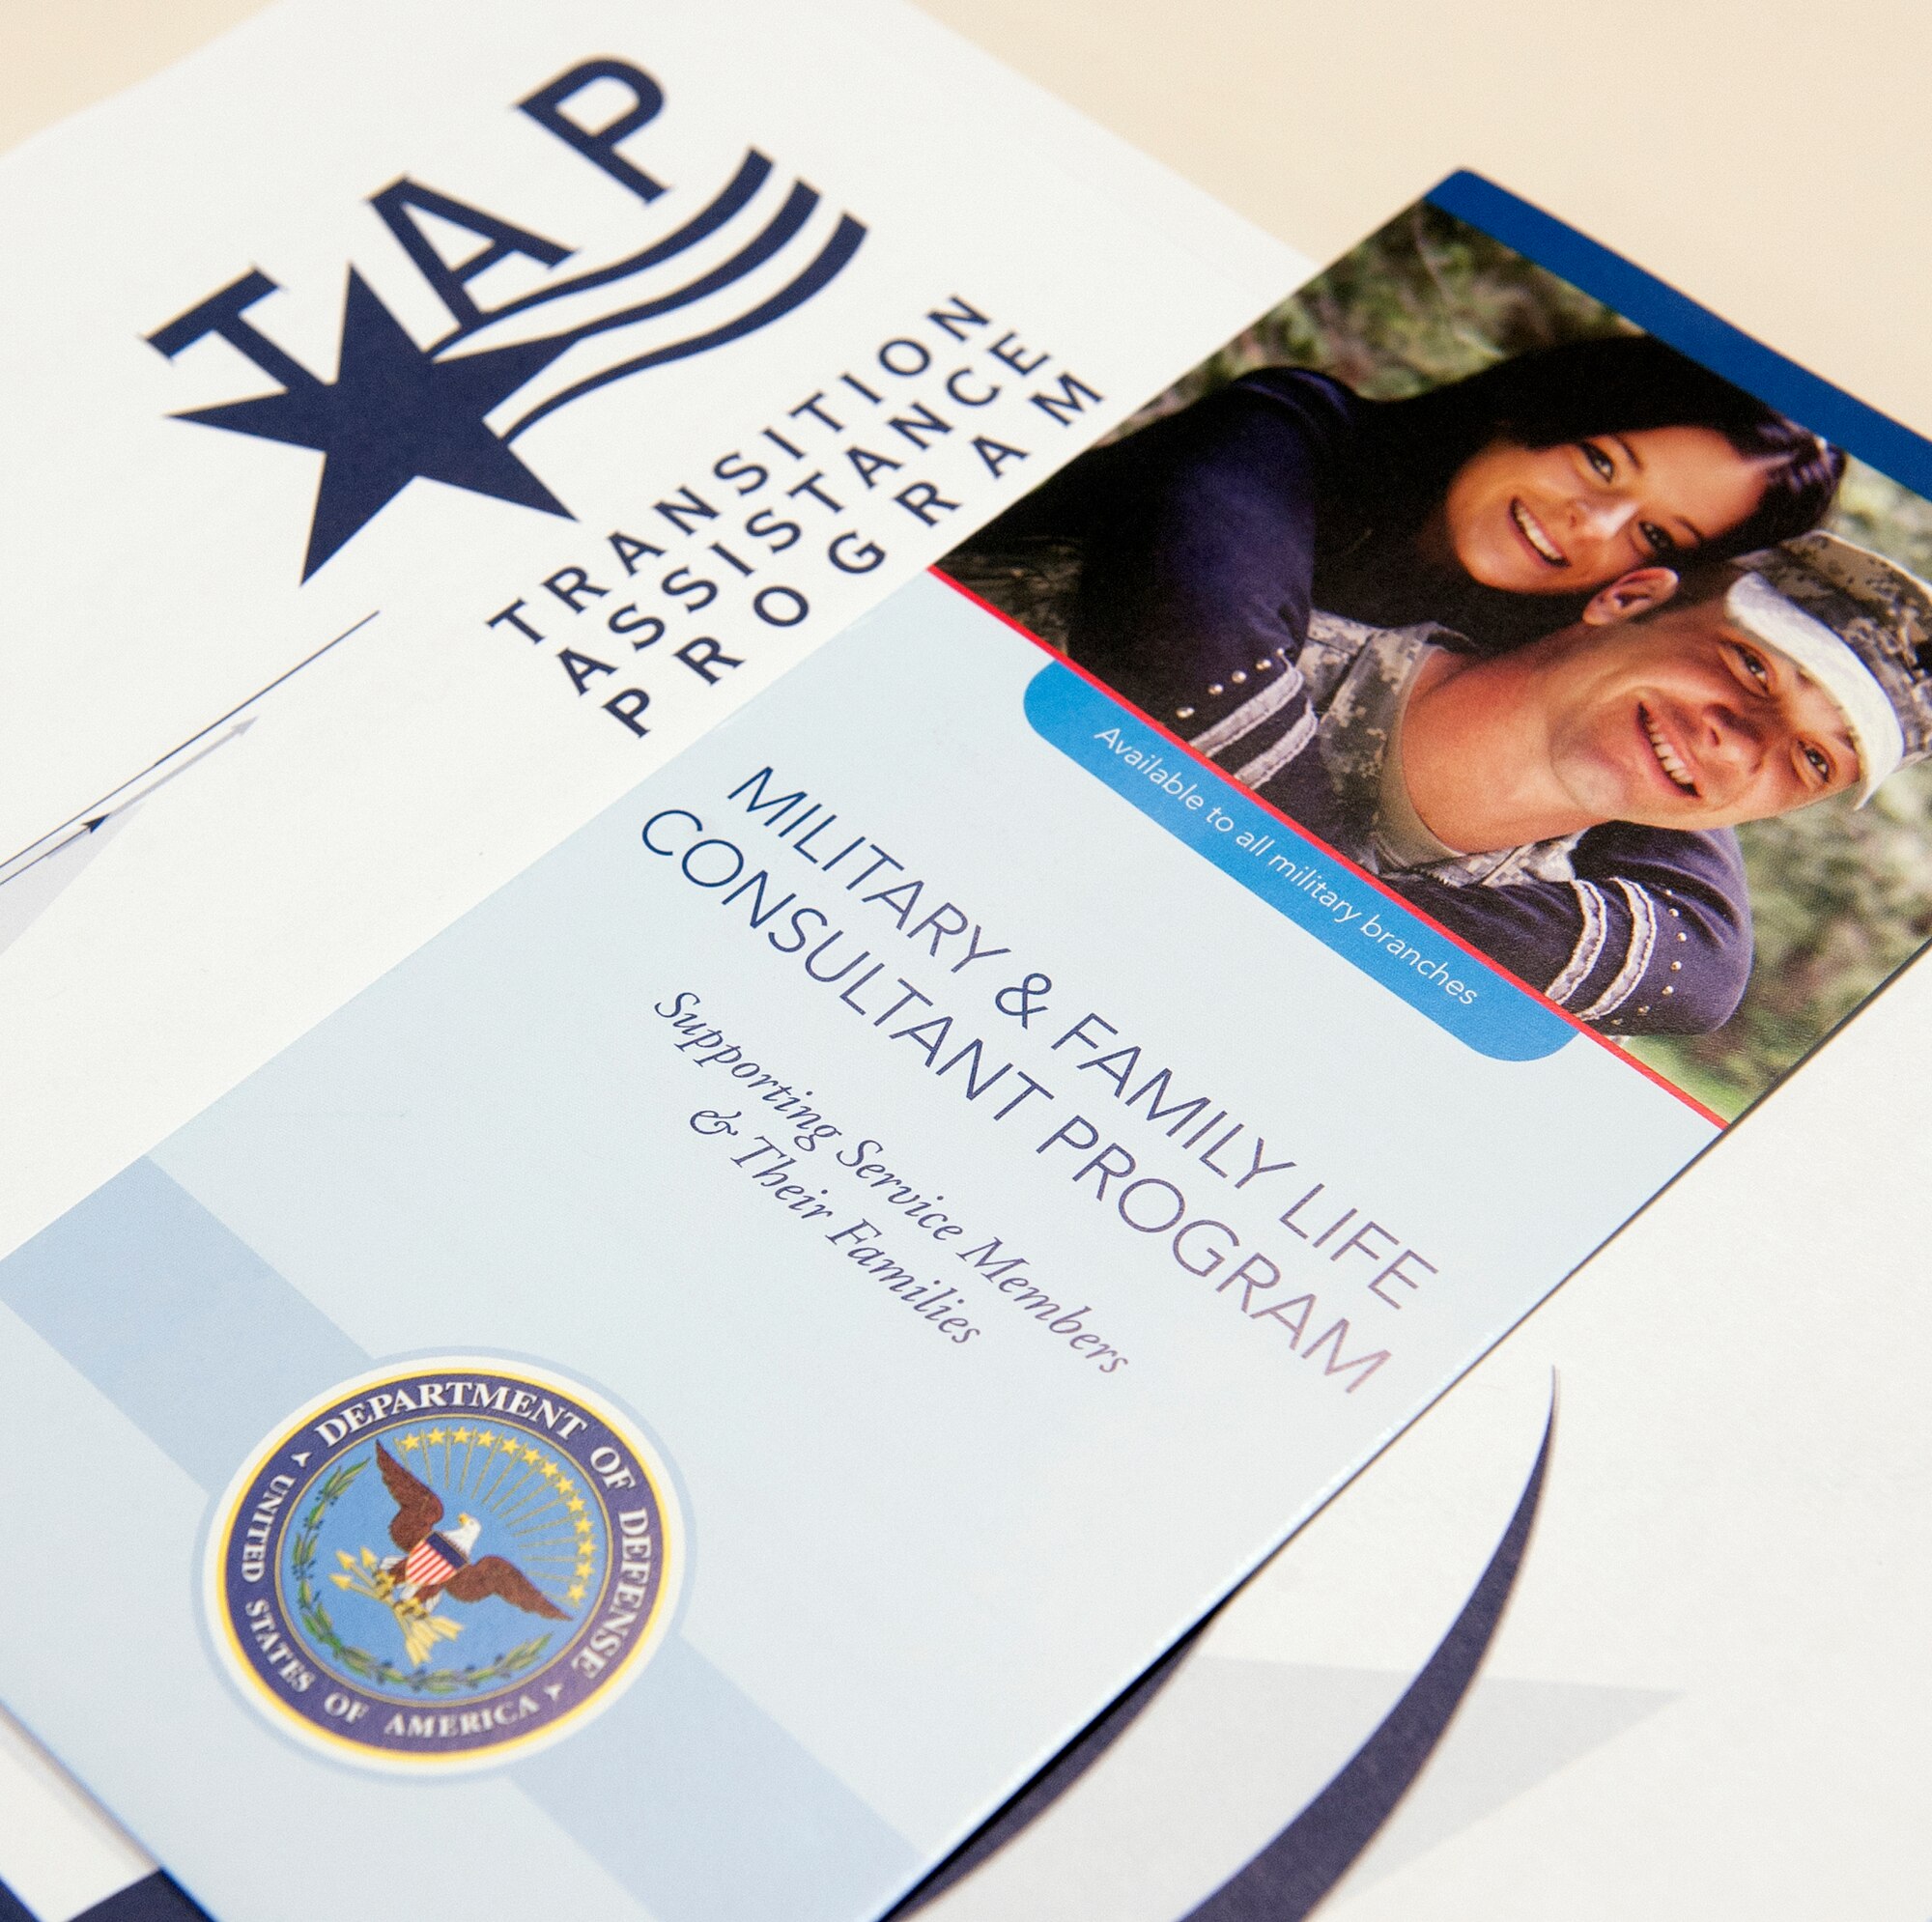 This booklet and brochure were samples of the reading material handed out to attendees during a Transition Assistance Program in the Pentagon, Washington D.C. on December 10, 2012. (U.S. Air Force photo/Andy